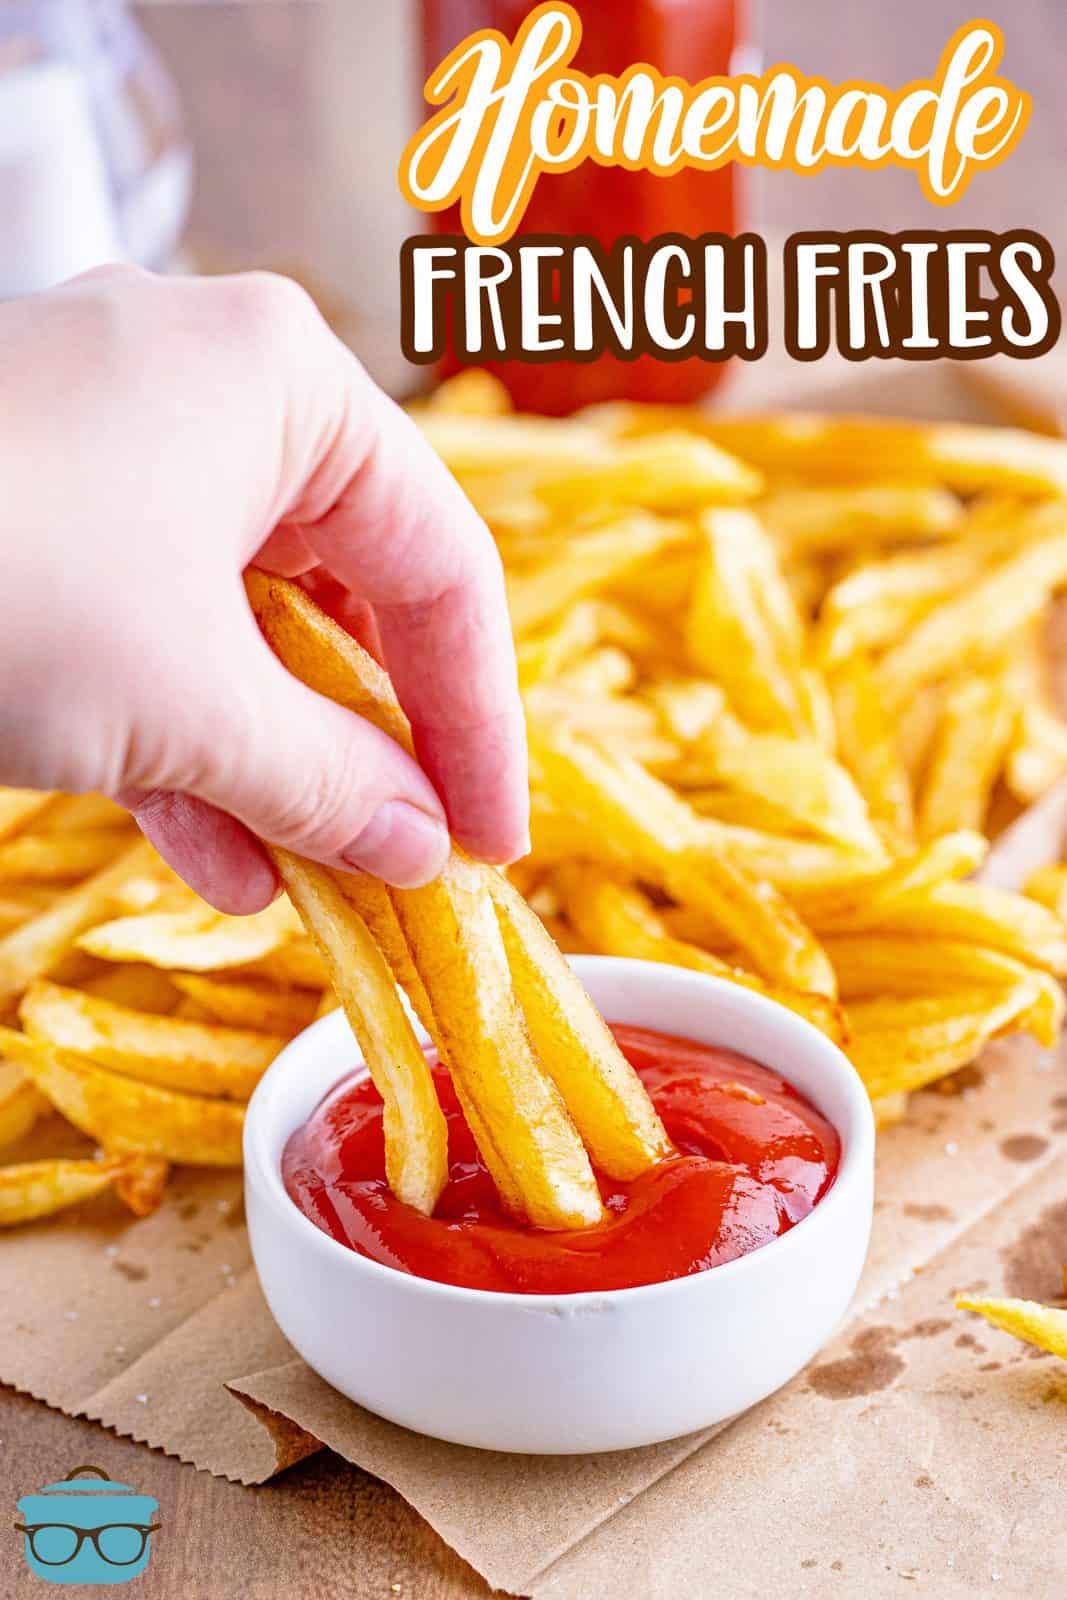 Homemade French Fries recipe from The Country Cook, photo showing a hand dipping a few cooked French Fries into a bowl of ketchup